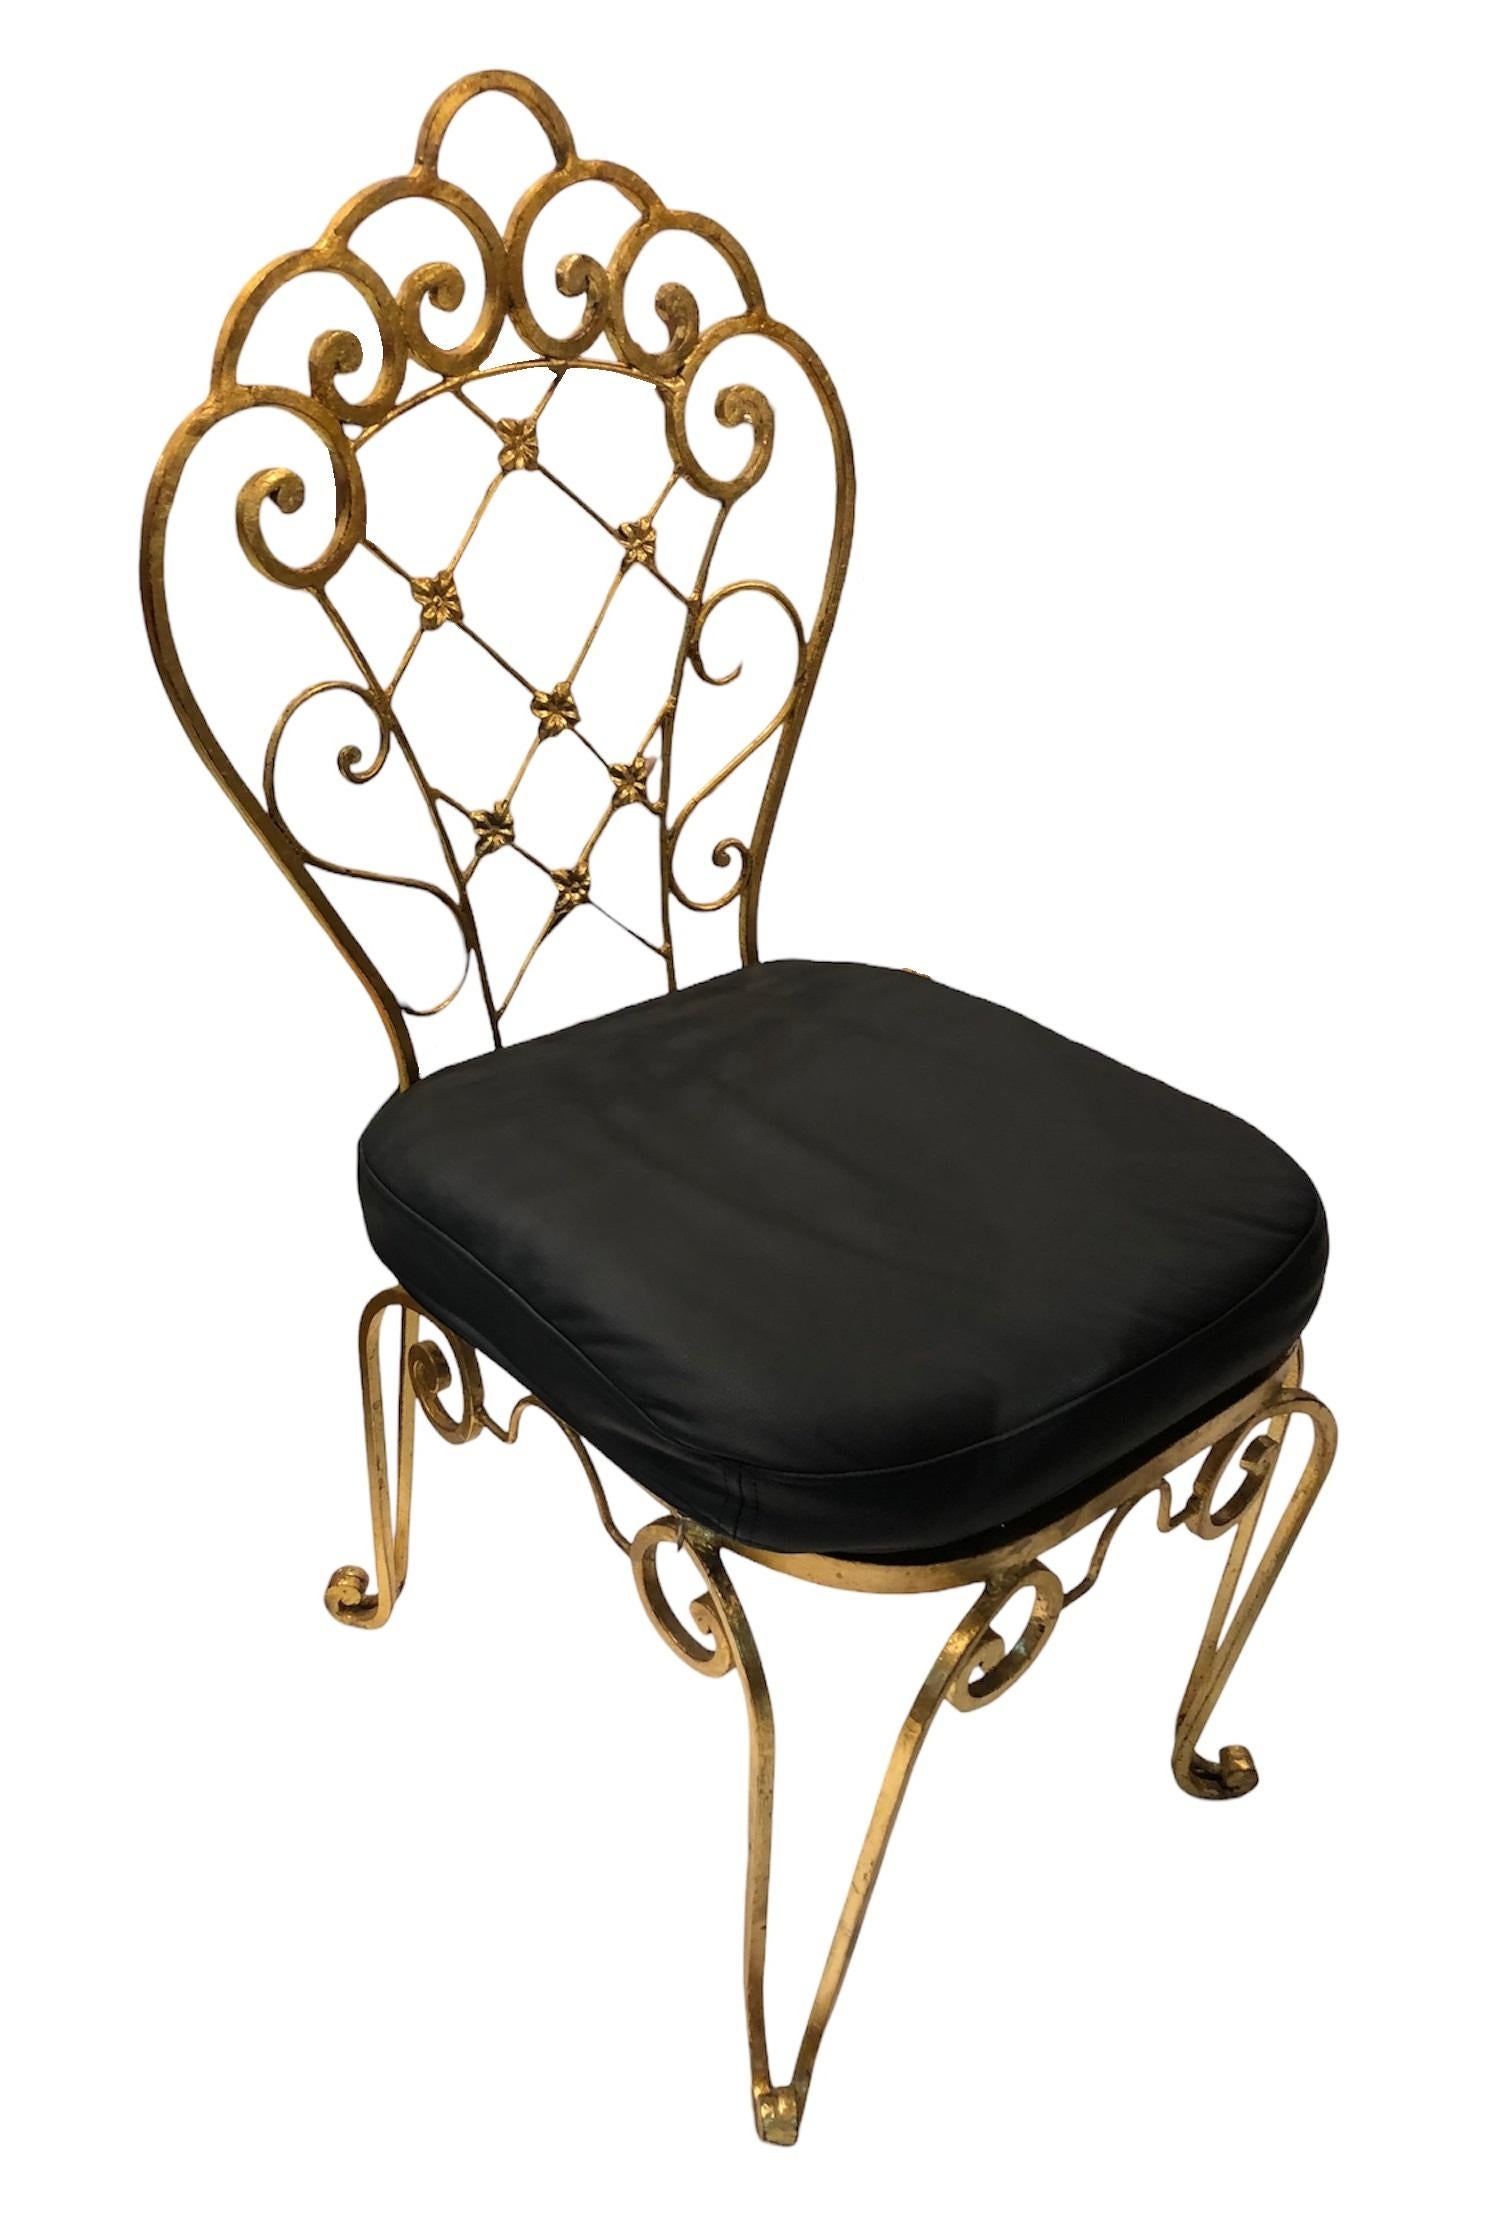 2 Chairs
iron on gold leaf
We have specialized in the sale of Art Deco and Art Nouveau and Vintage styles since 1982. If you have any questions we are at your disposal.
Pushing the button that reads 'View All From Seller'. And you can see more